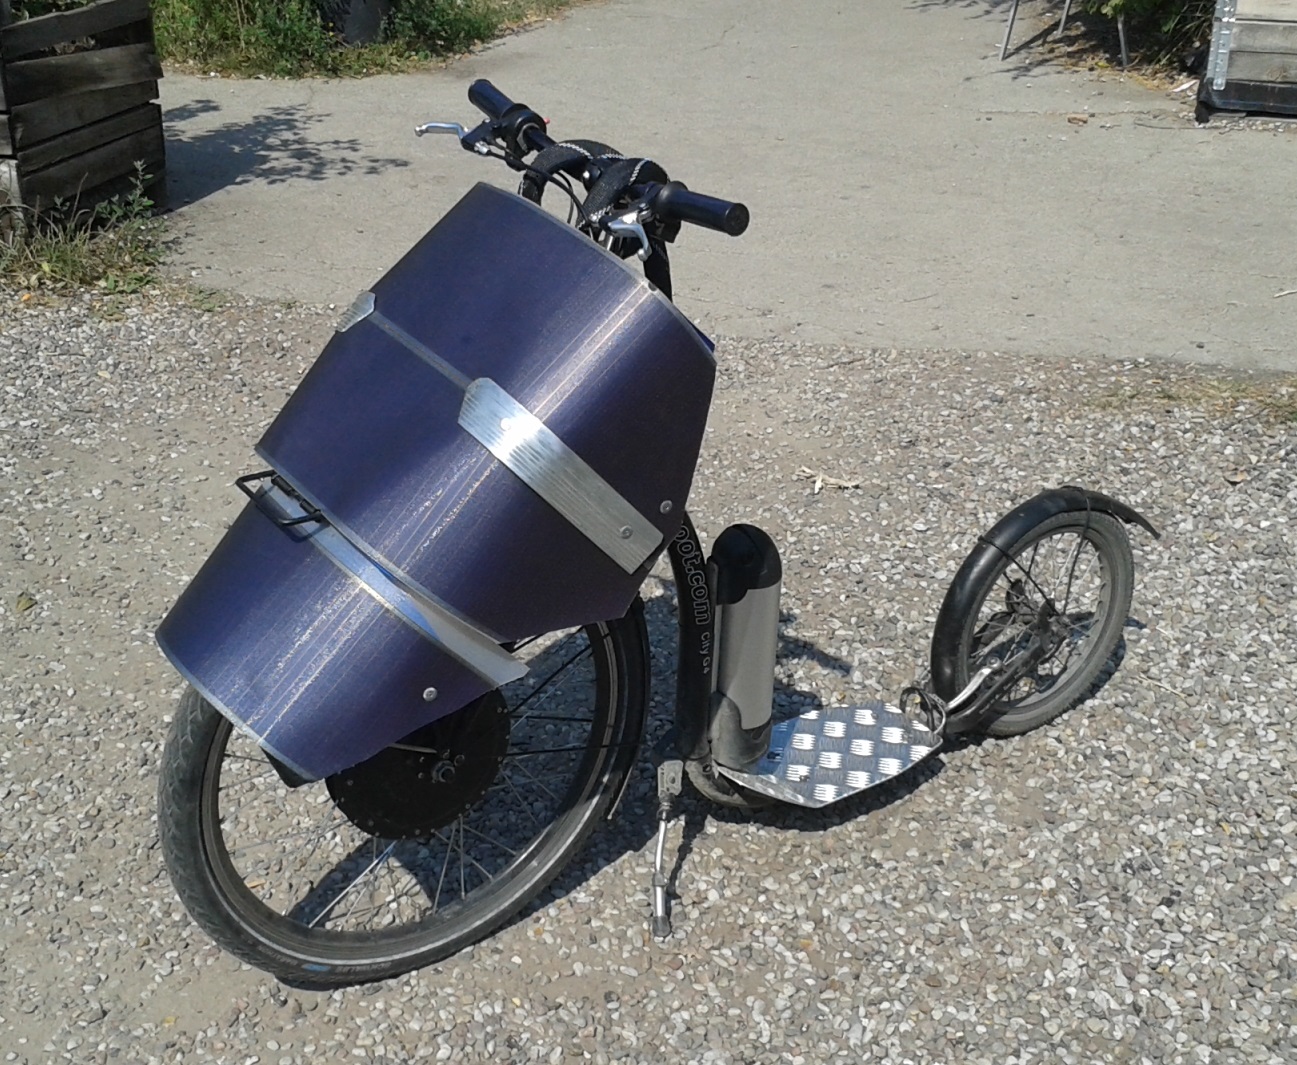 #Solarscooter